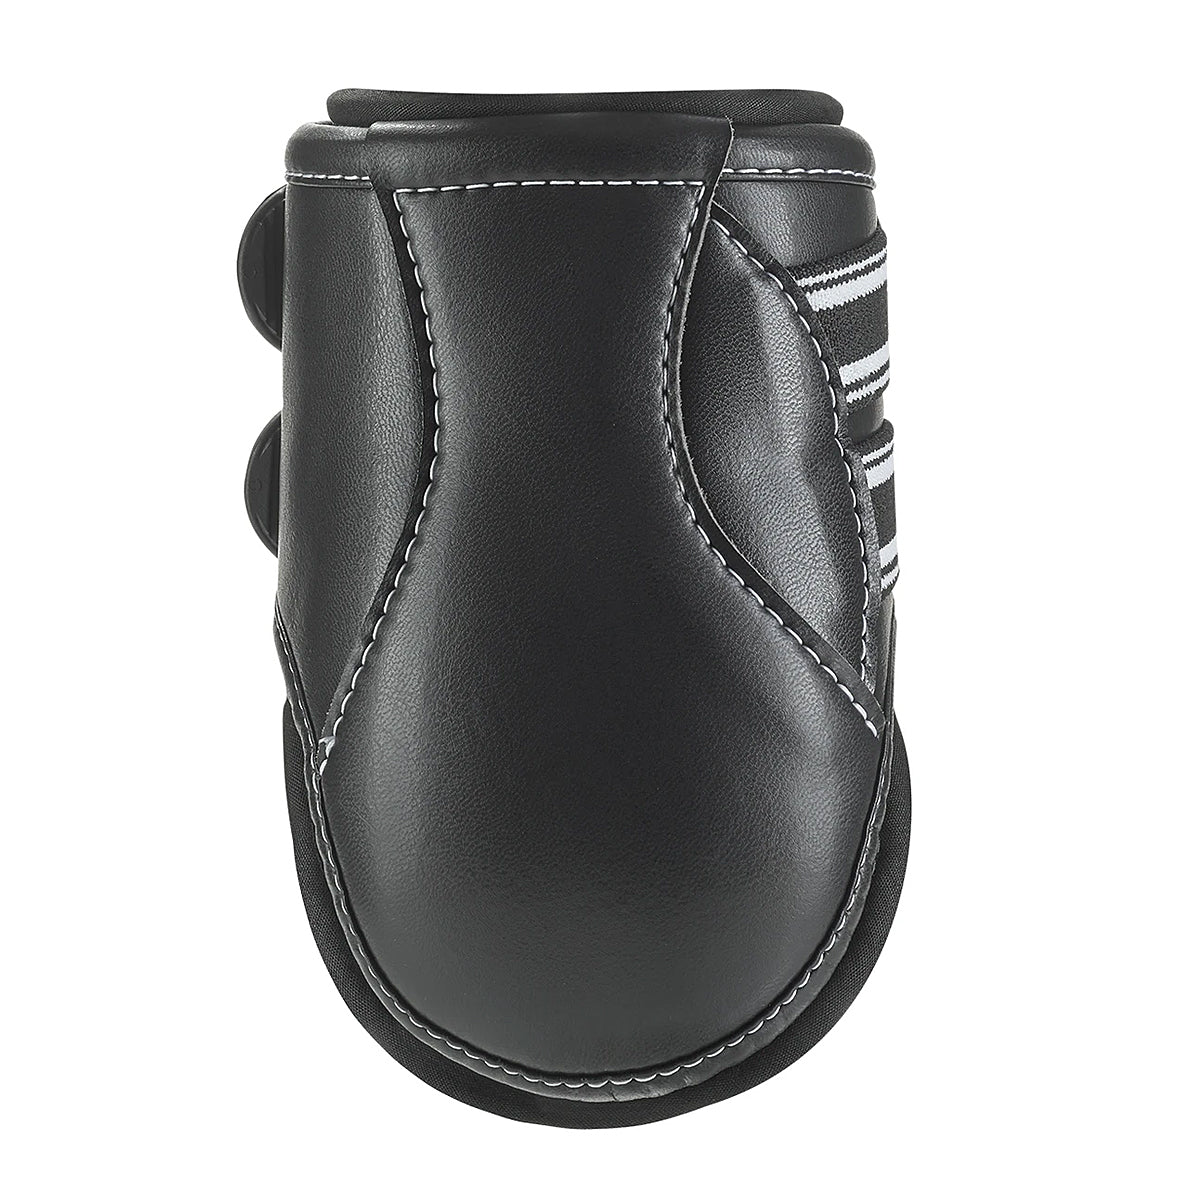 EquiFit D-Teq Hind Boot